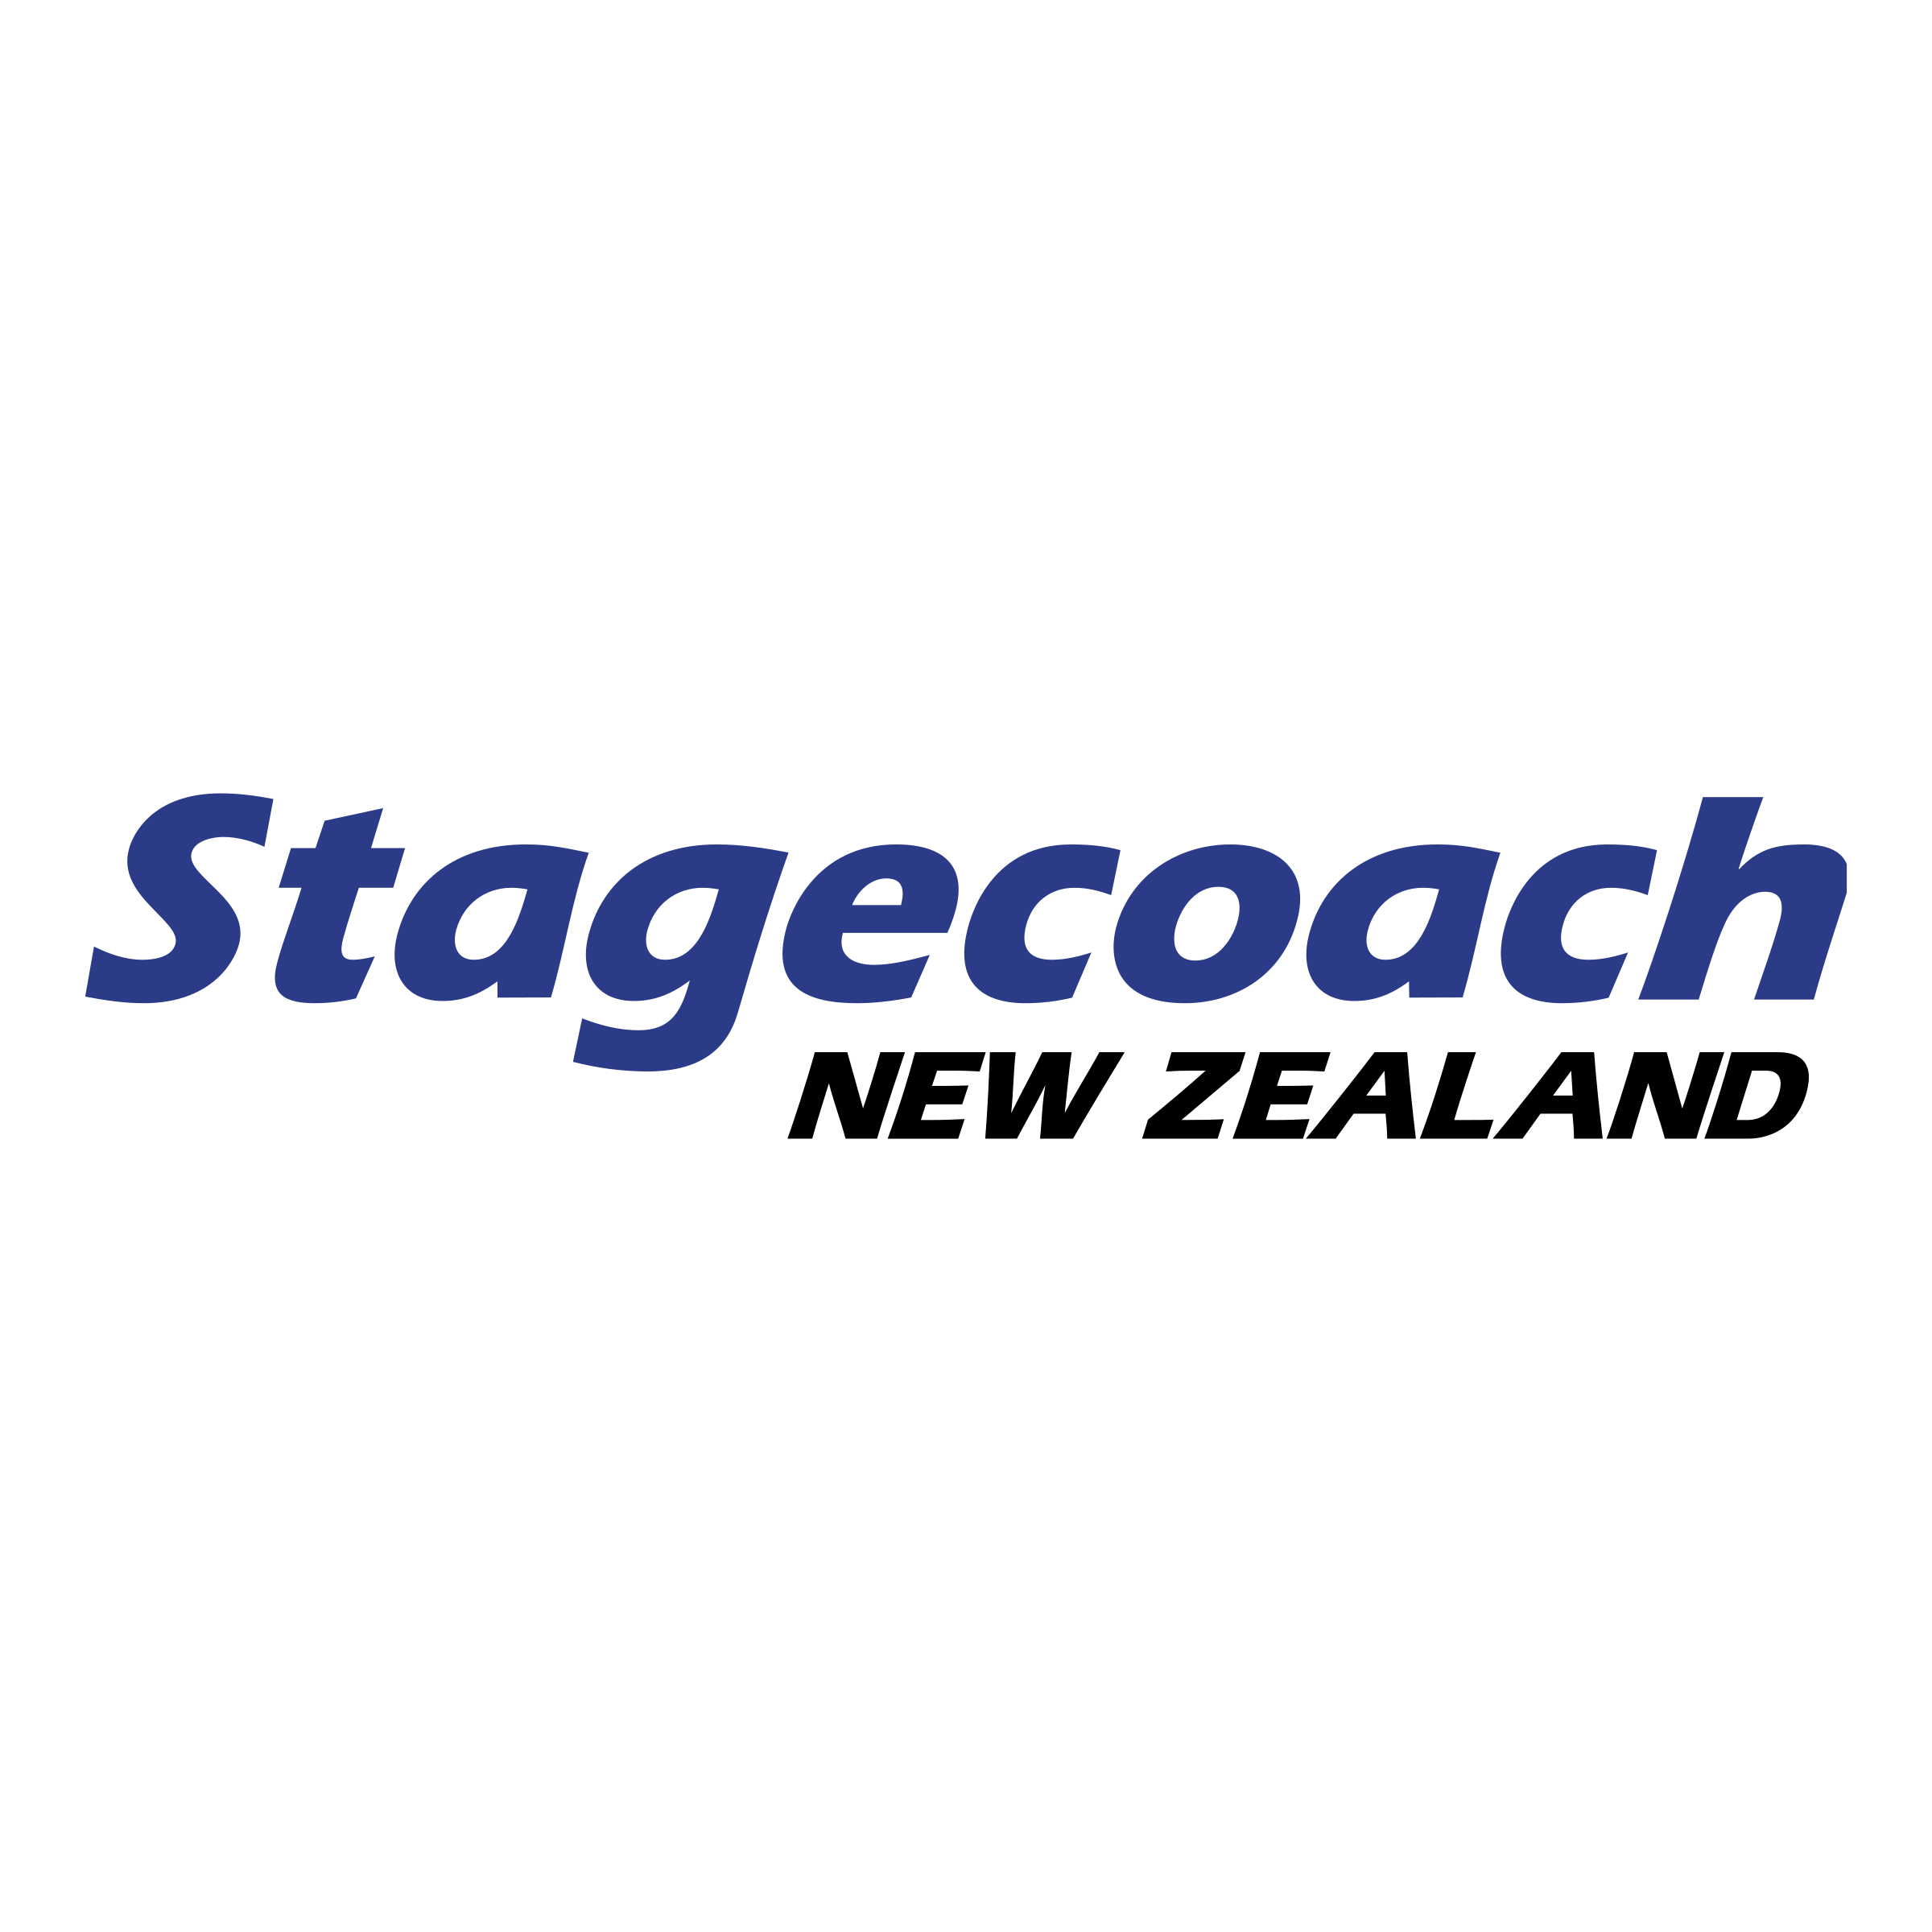 Stagecoach Logo - Stagecoach New Zealand Logo PNG Transparent & SVG Vector